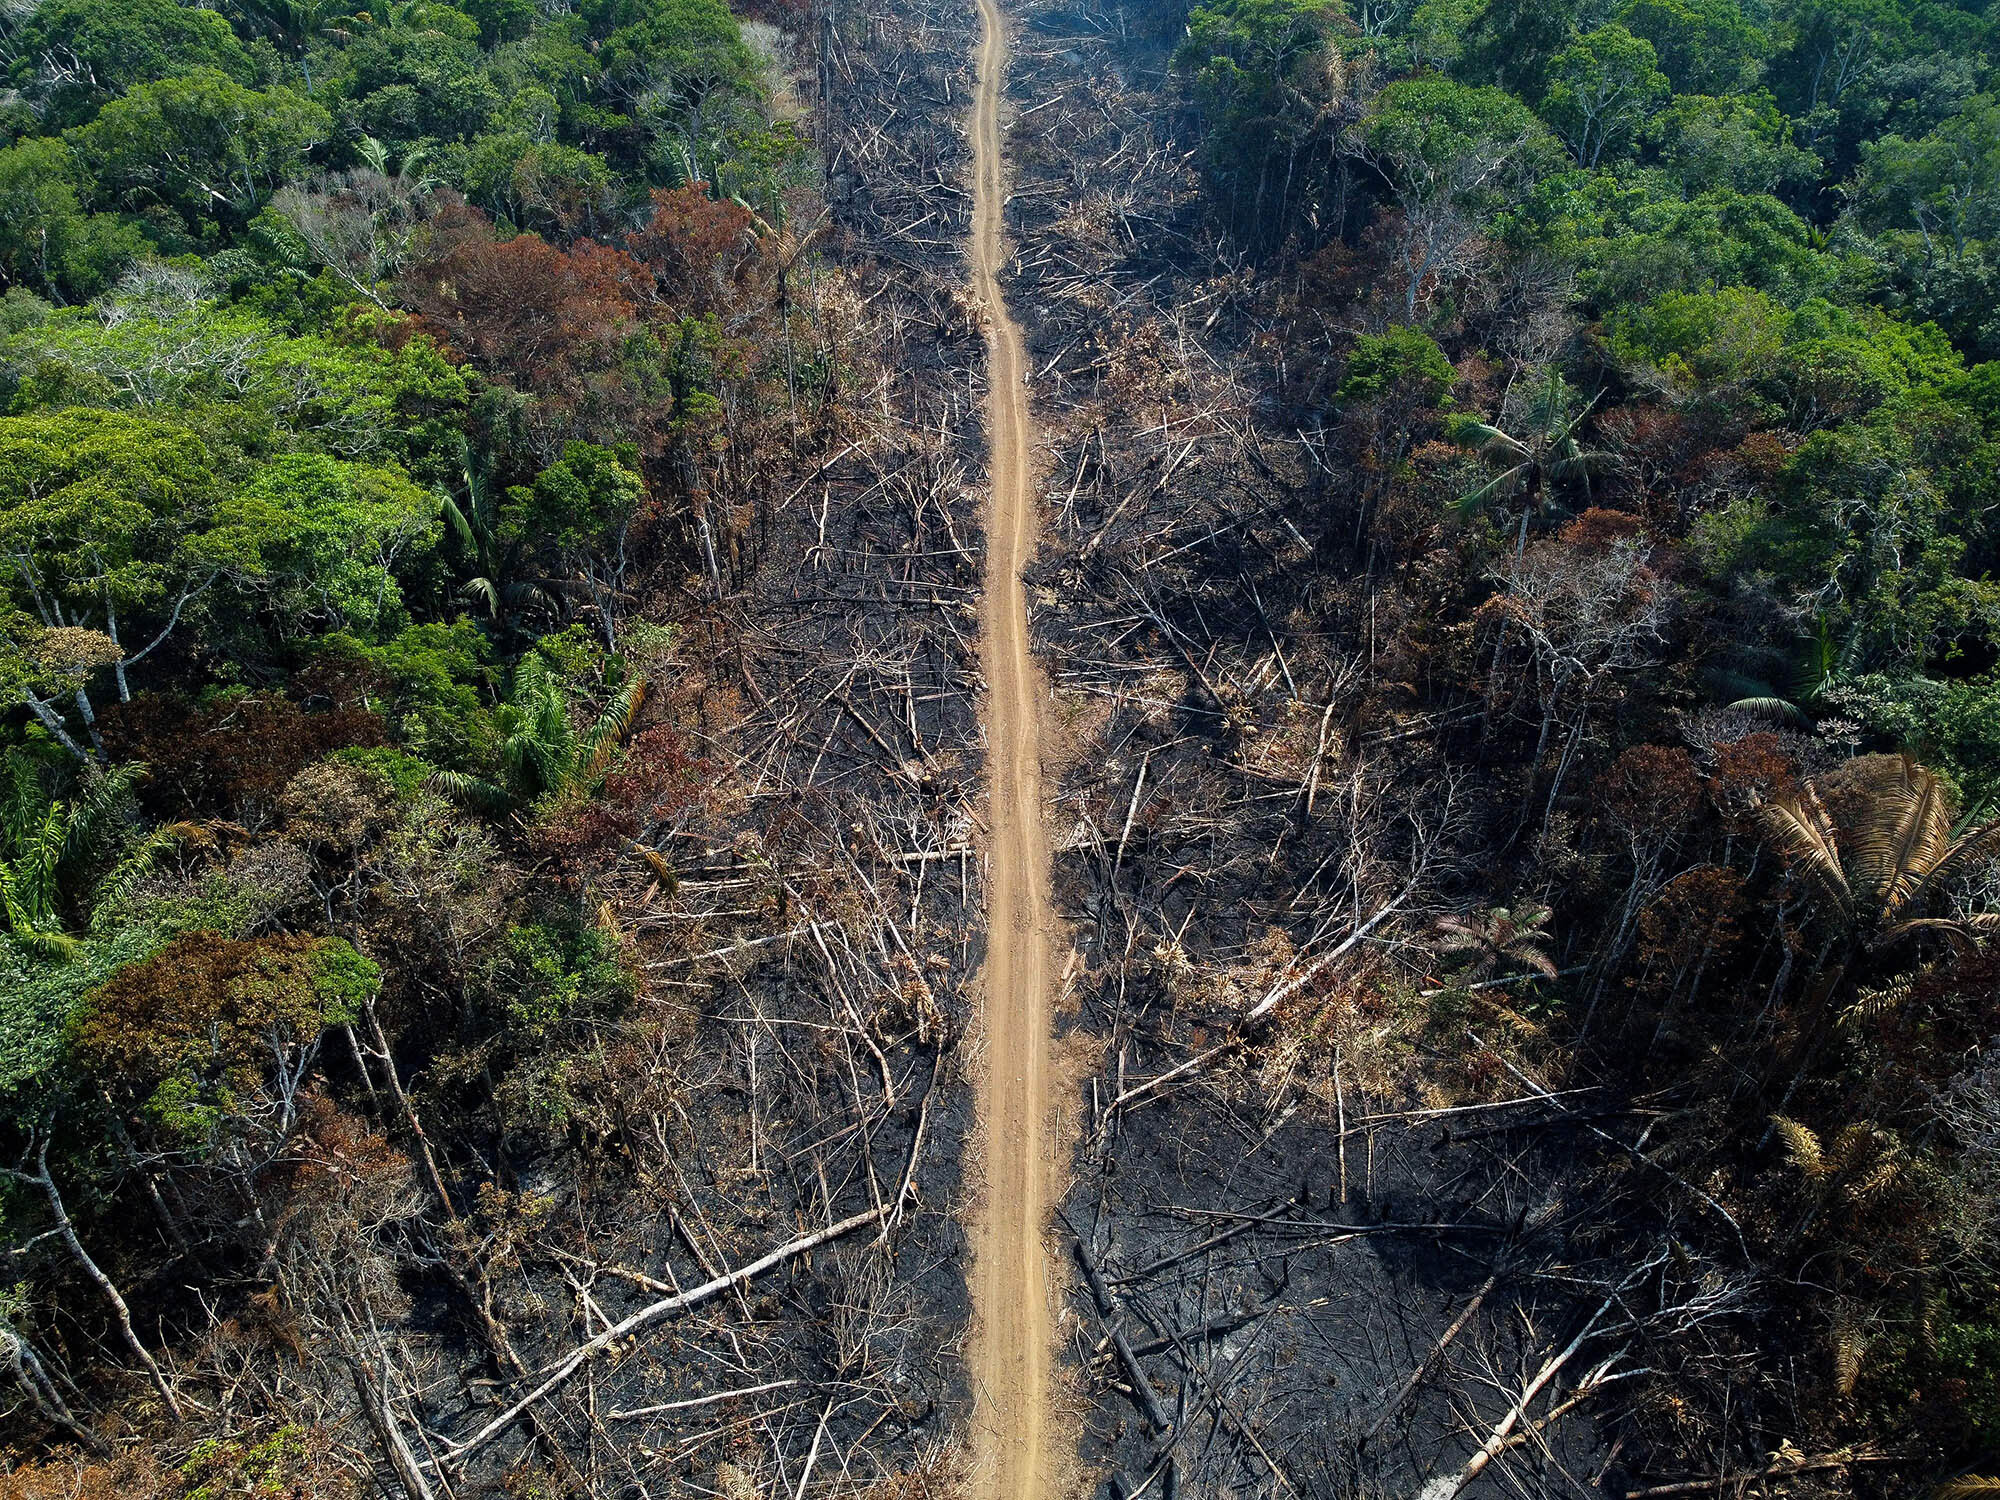 Can Amazon Countries Save the Rain Forest? | Council on Foreign Relations